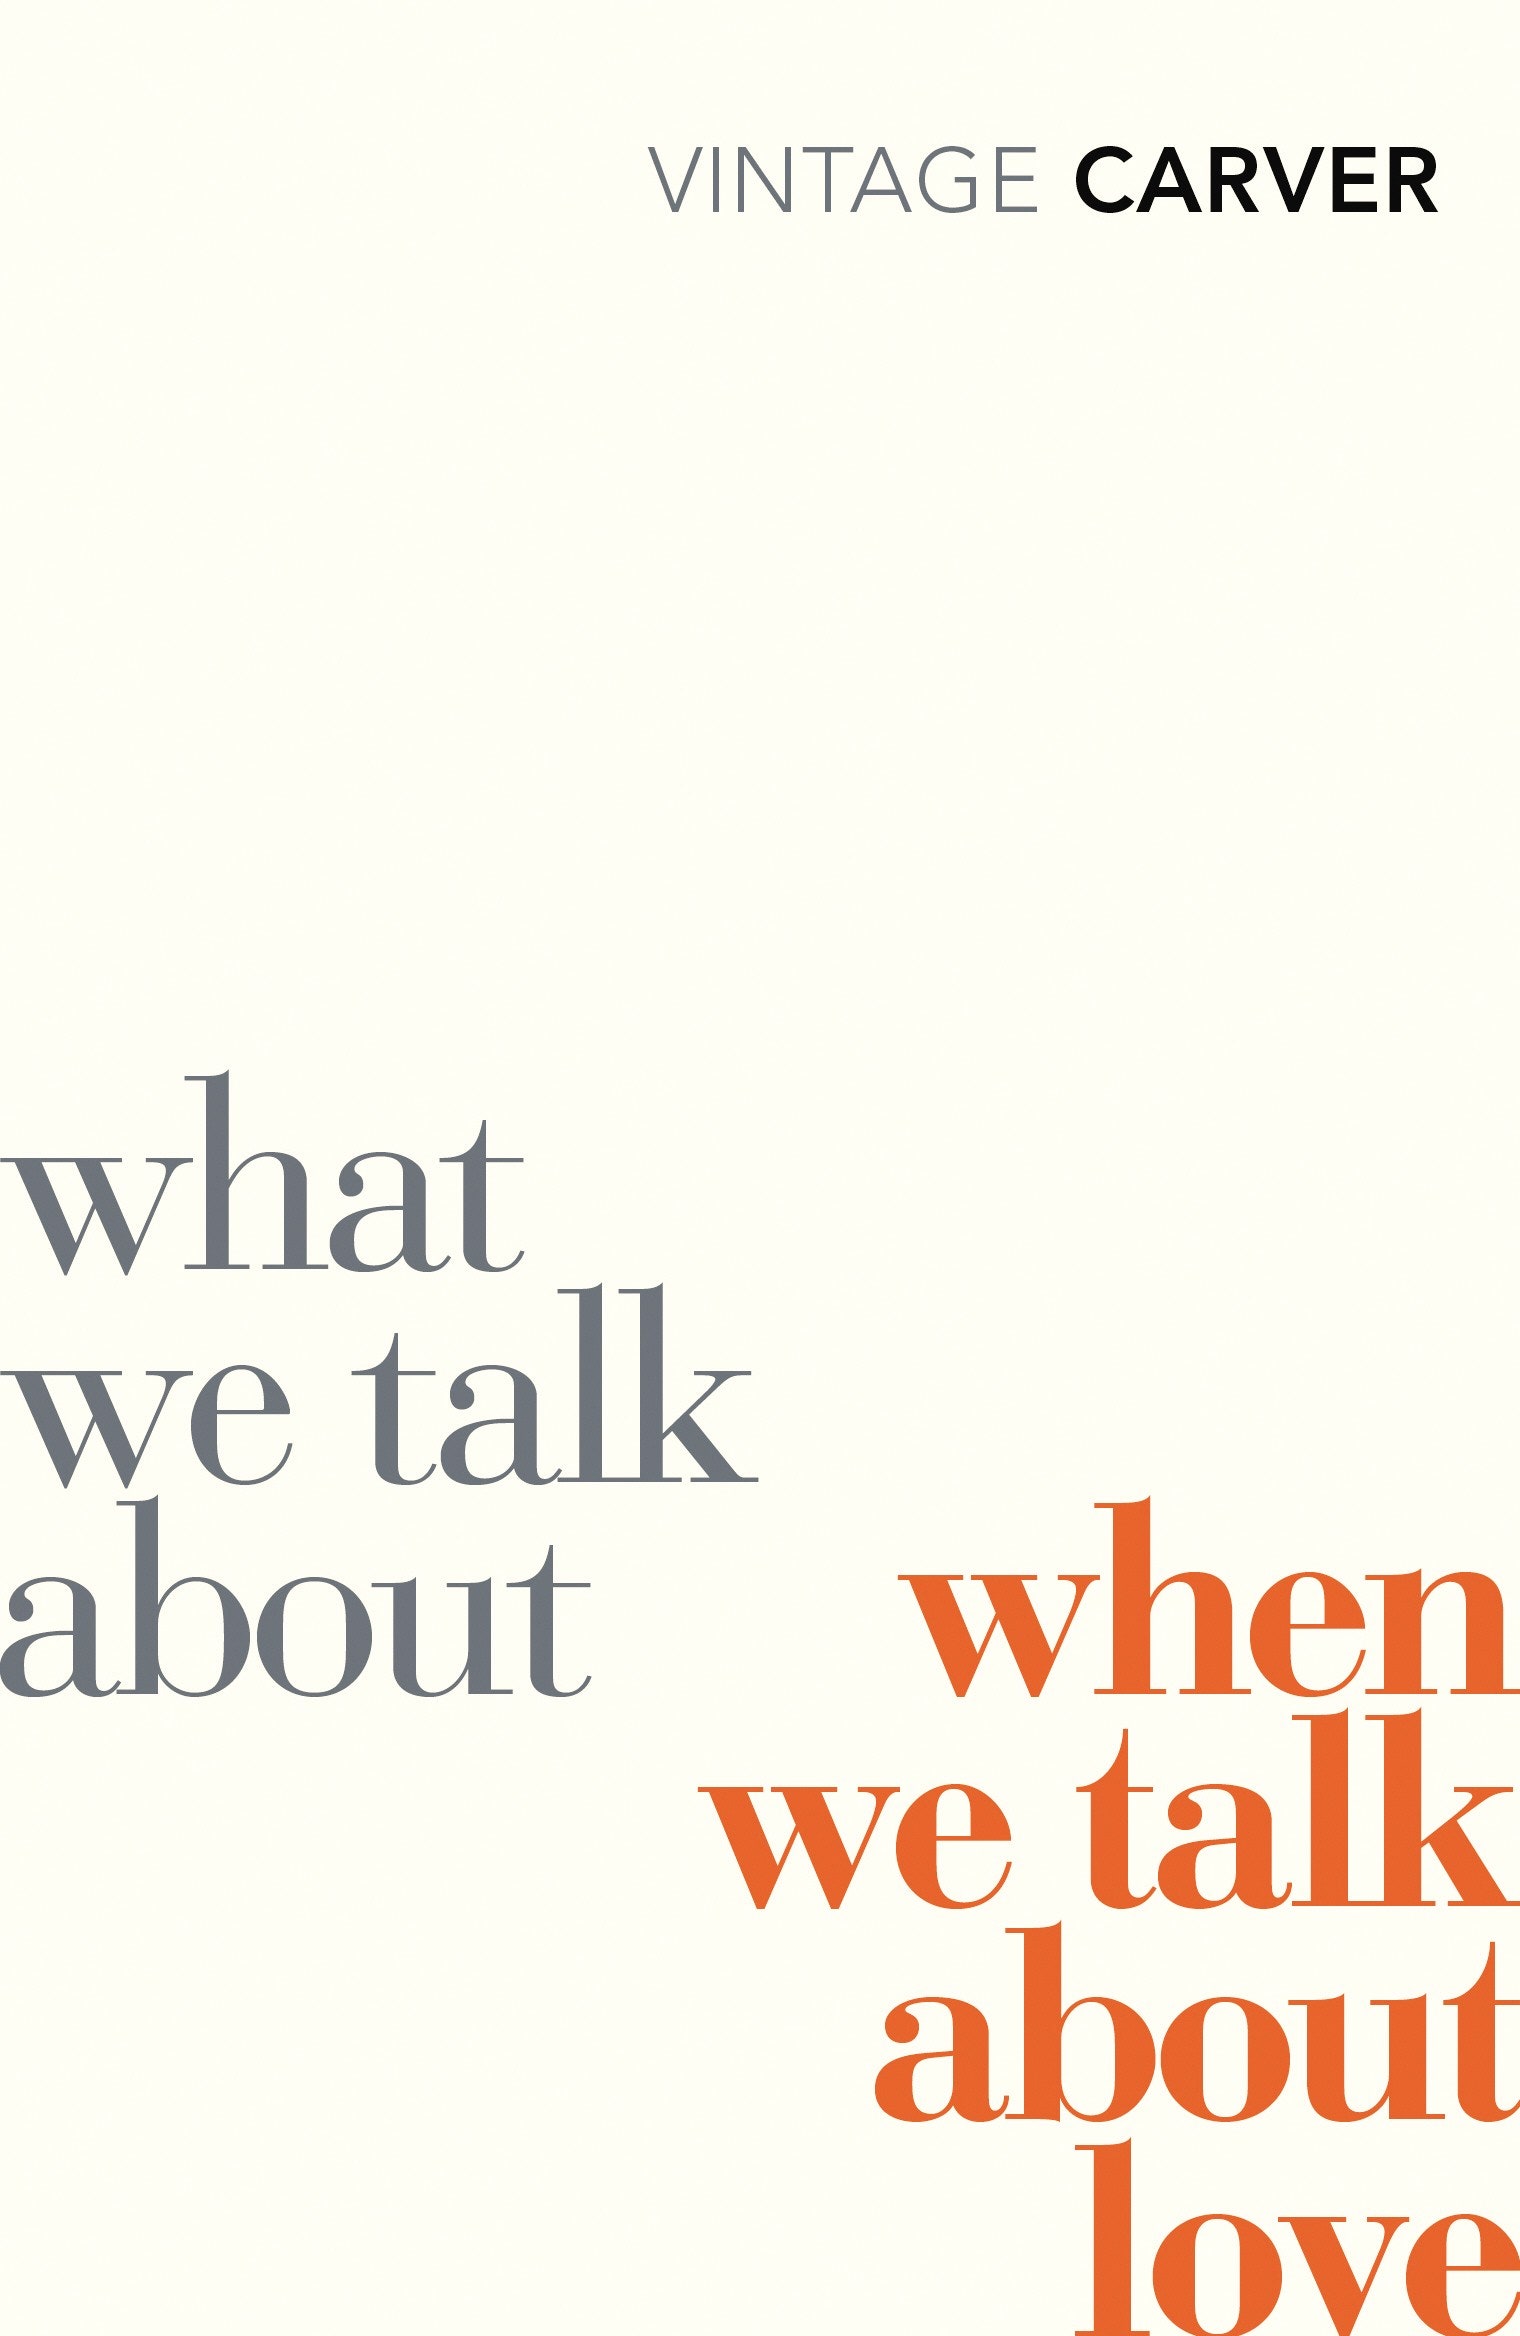 What We Talk About When We Talk About Love 859 руб.